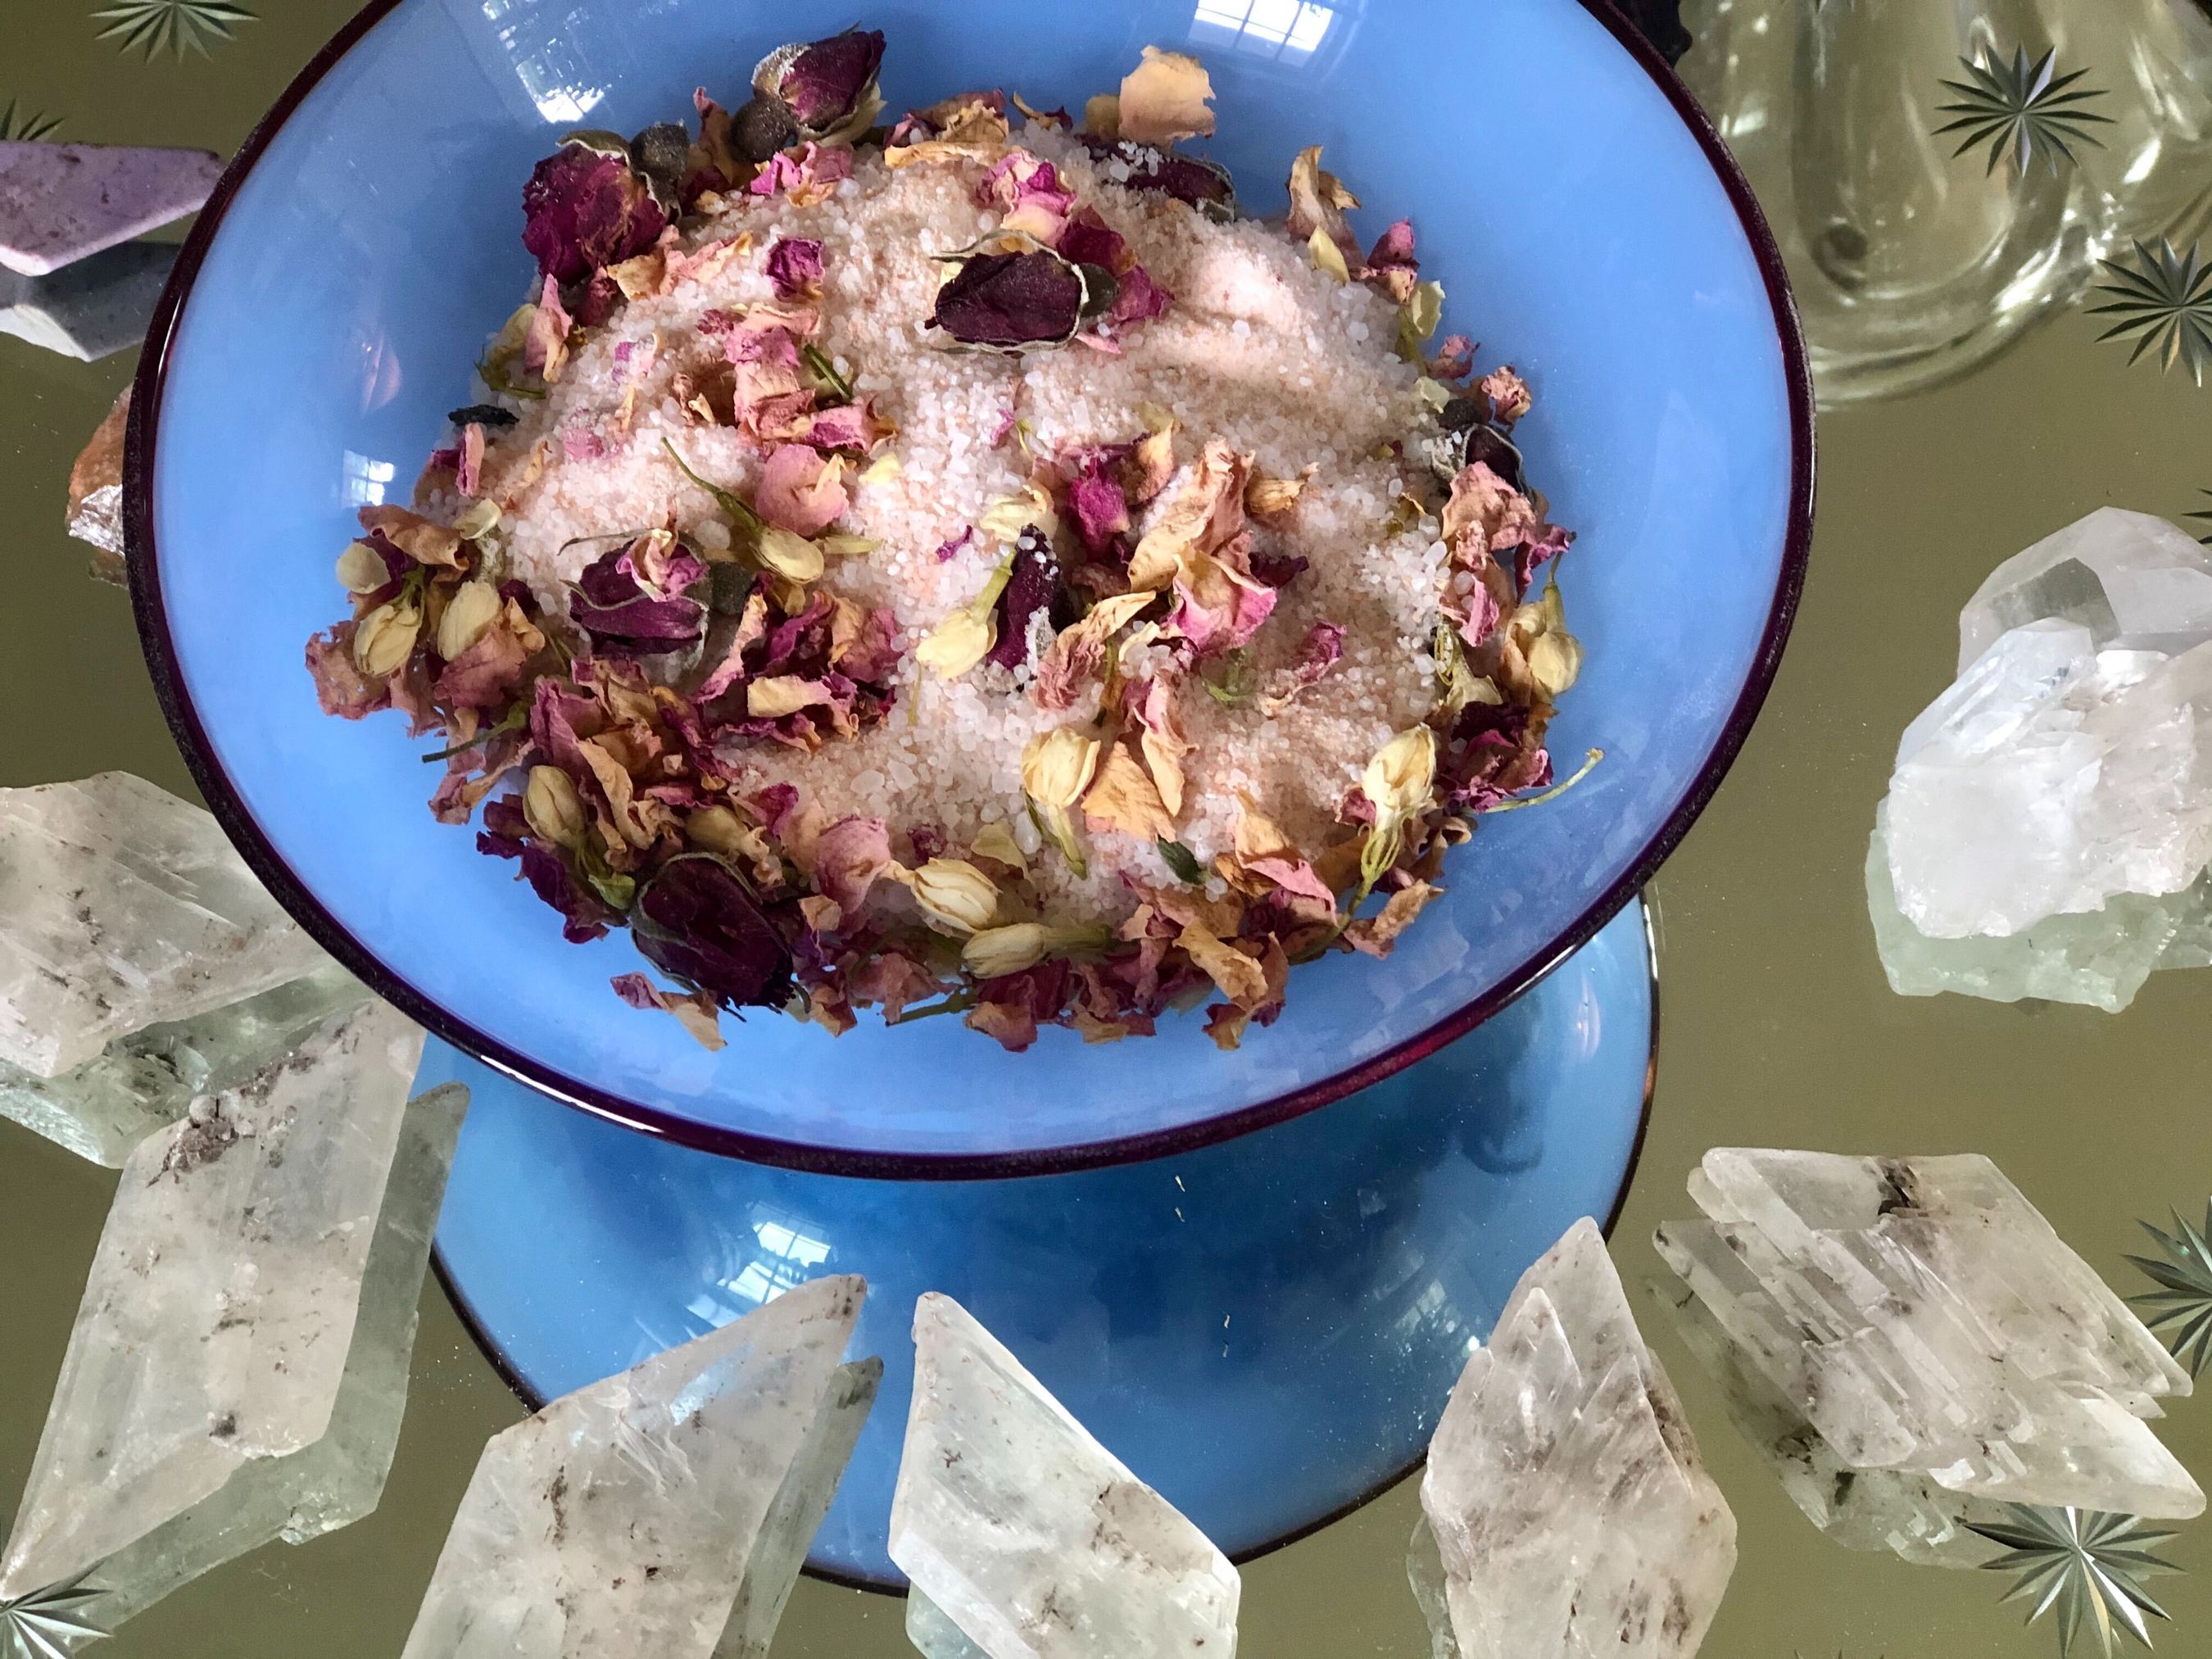 Dried rose petals and crystals